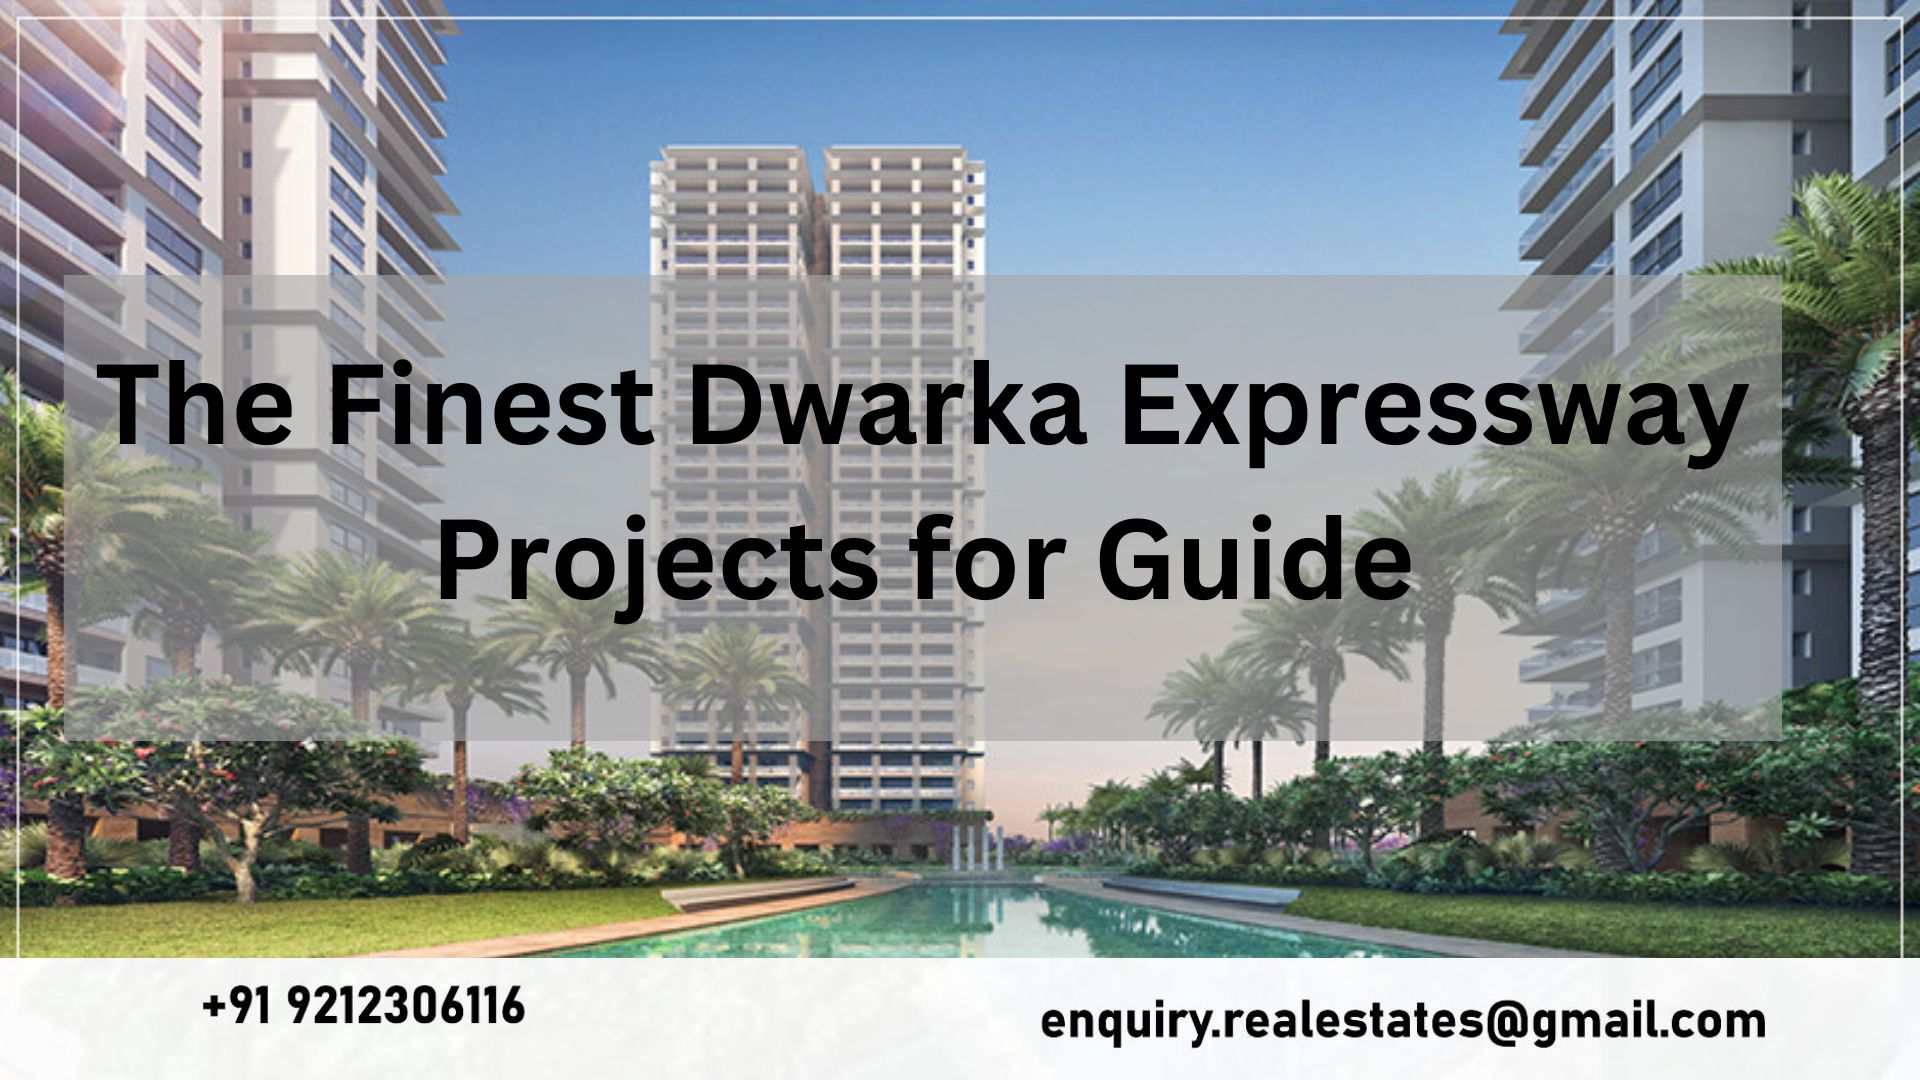 The Finest Dwarka Expressway Projects for Guide